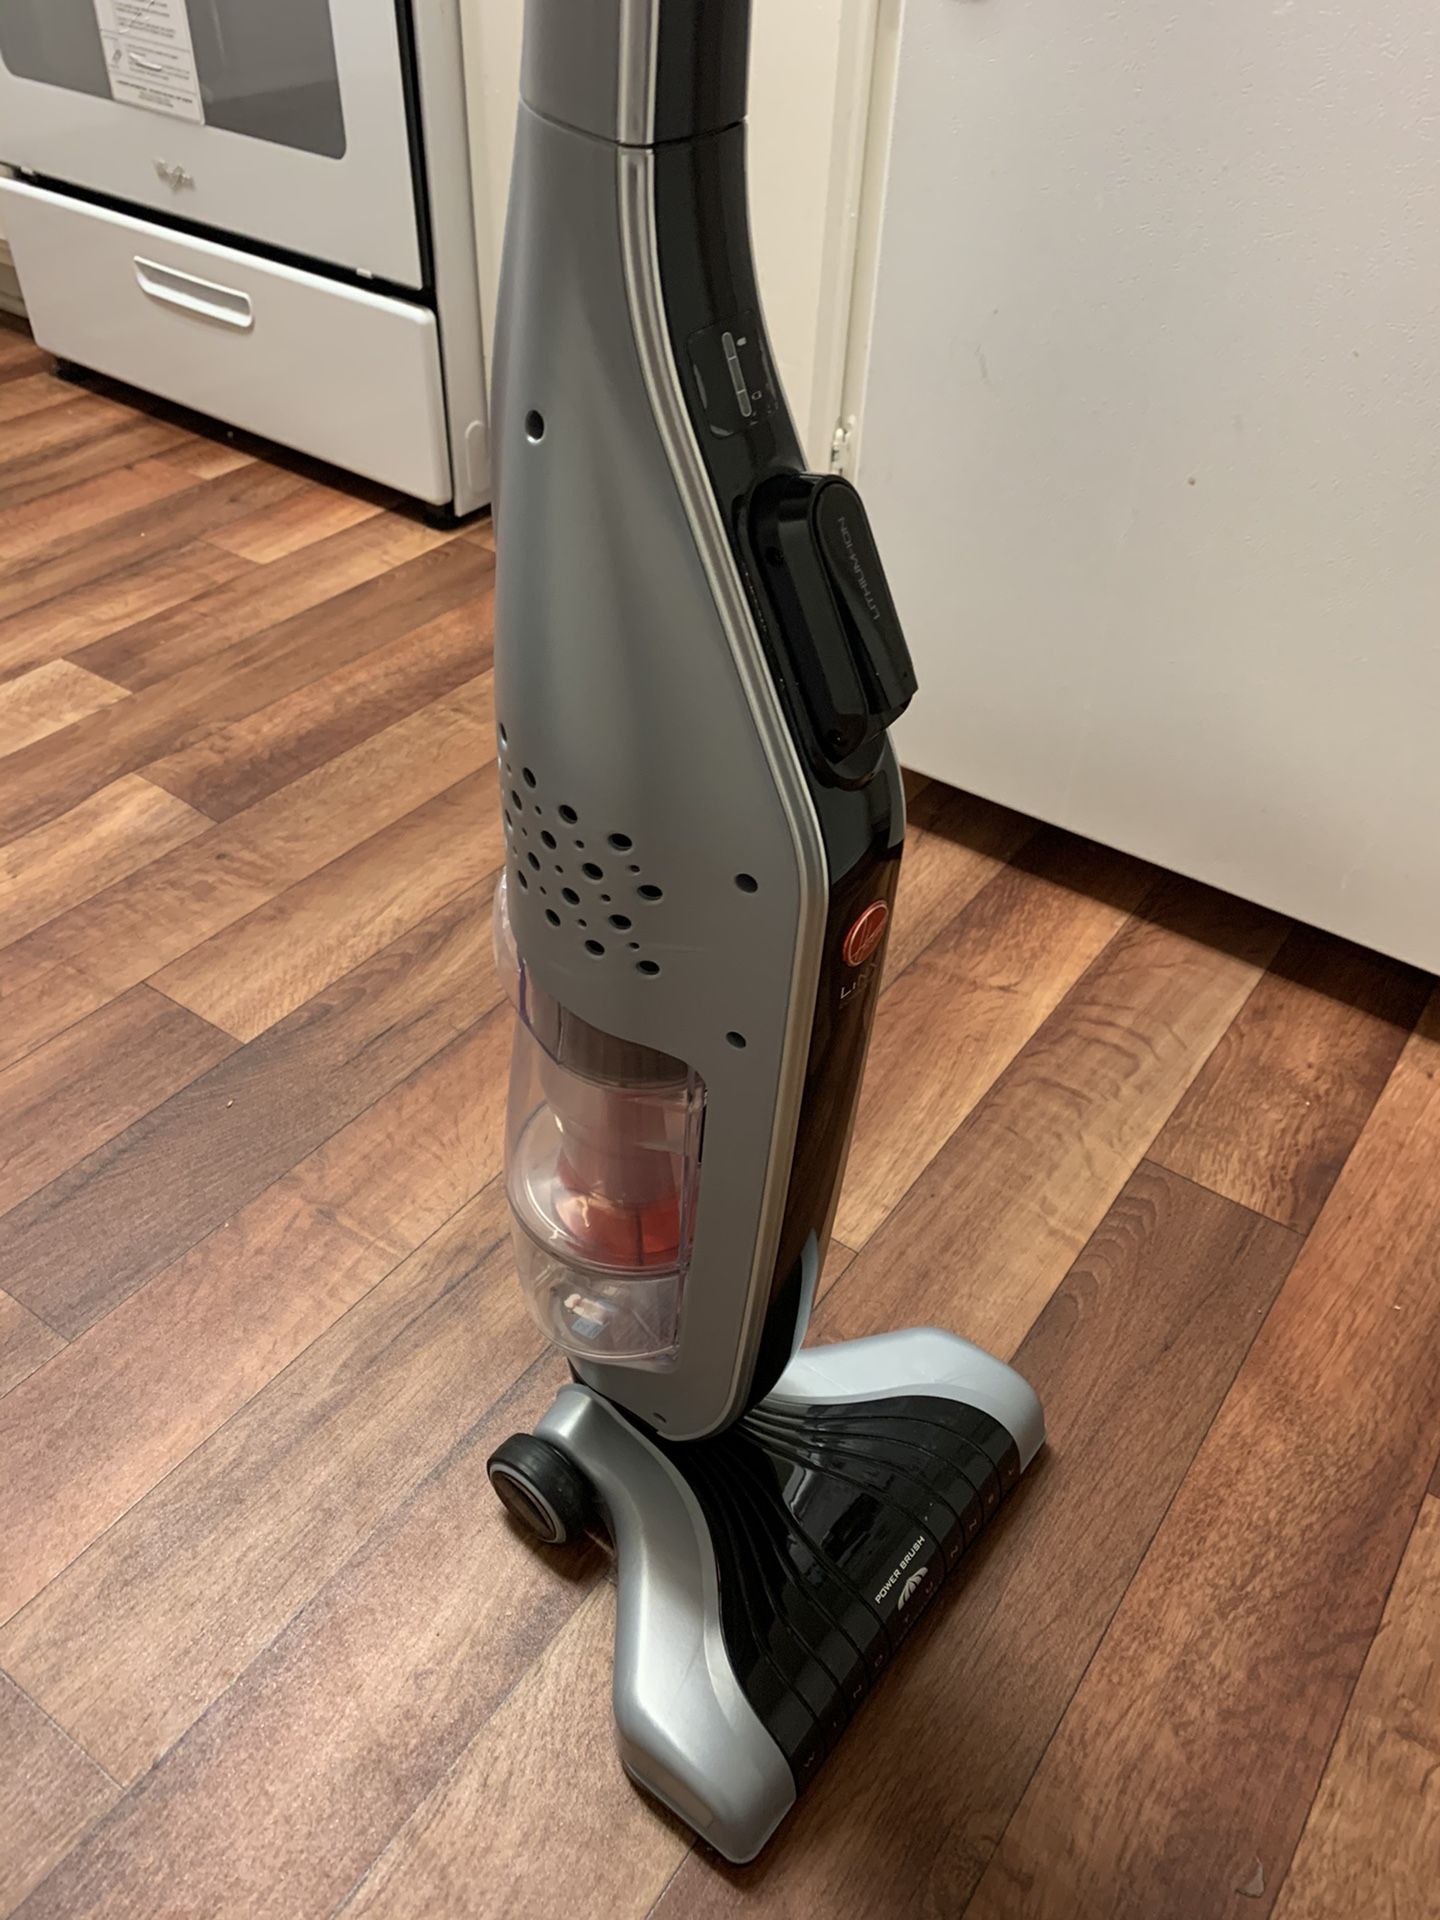 Hoover linx cordless vacuum. (Missing charger)